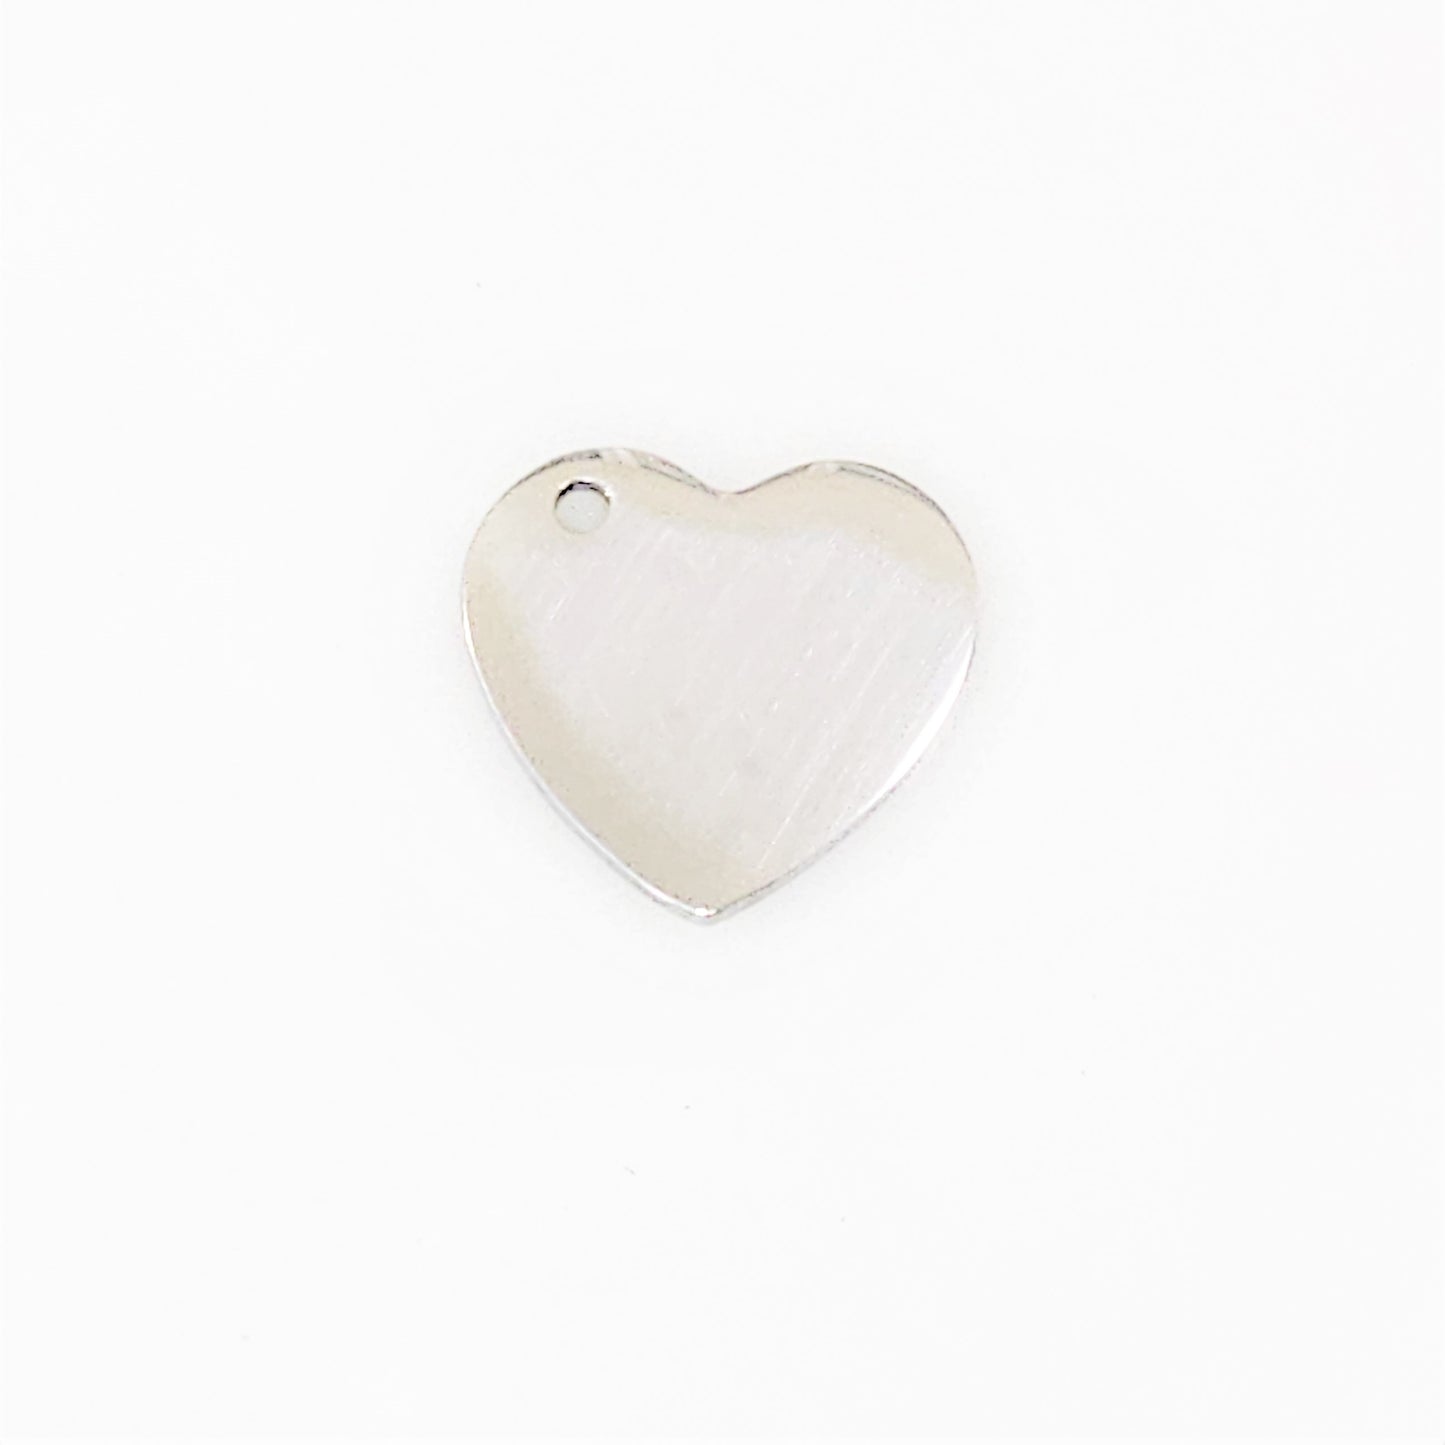 Stainless Steel Heart Charm - 15mm